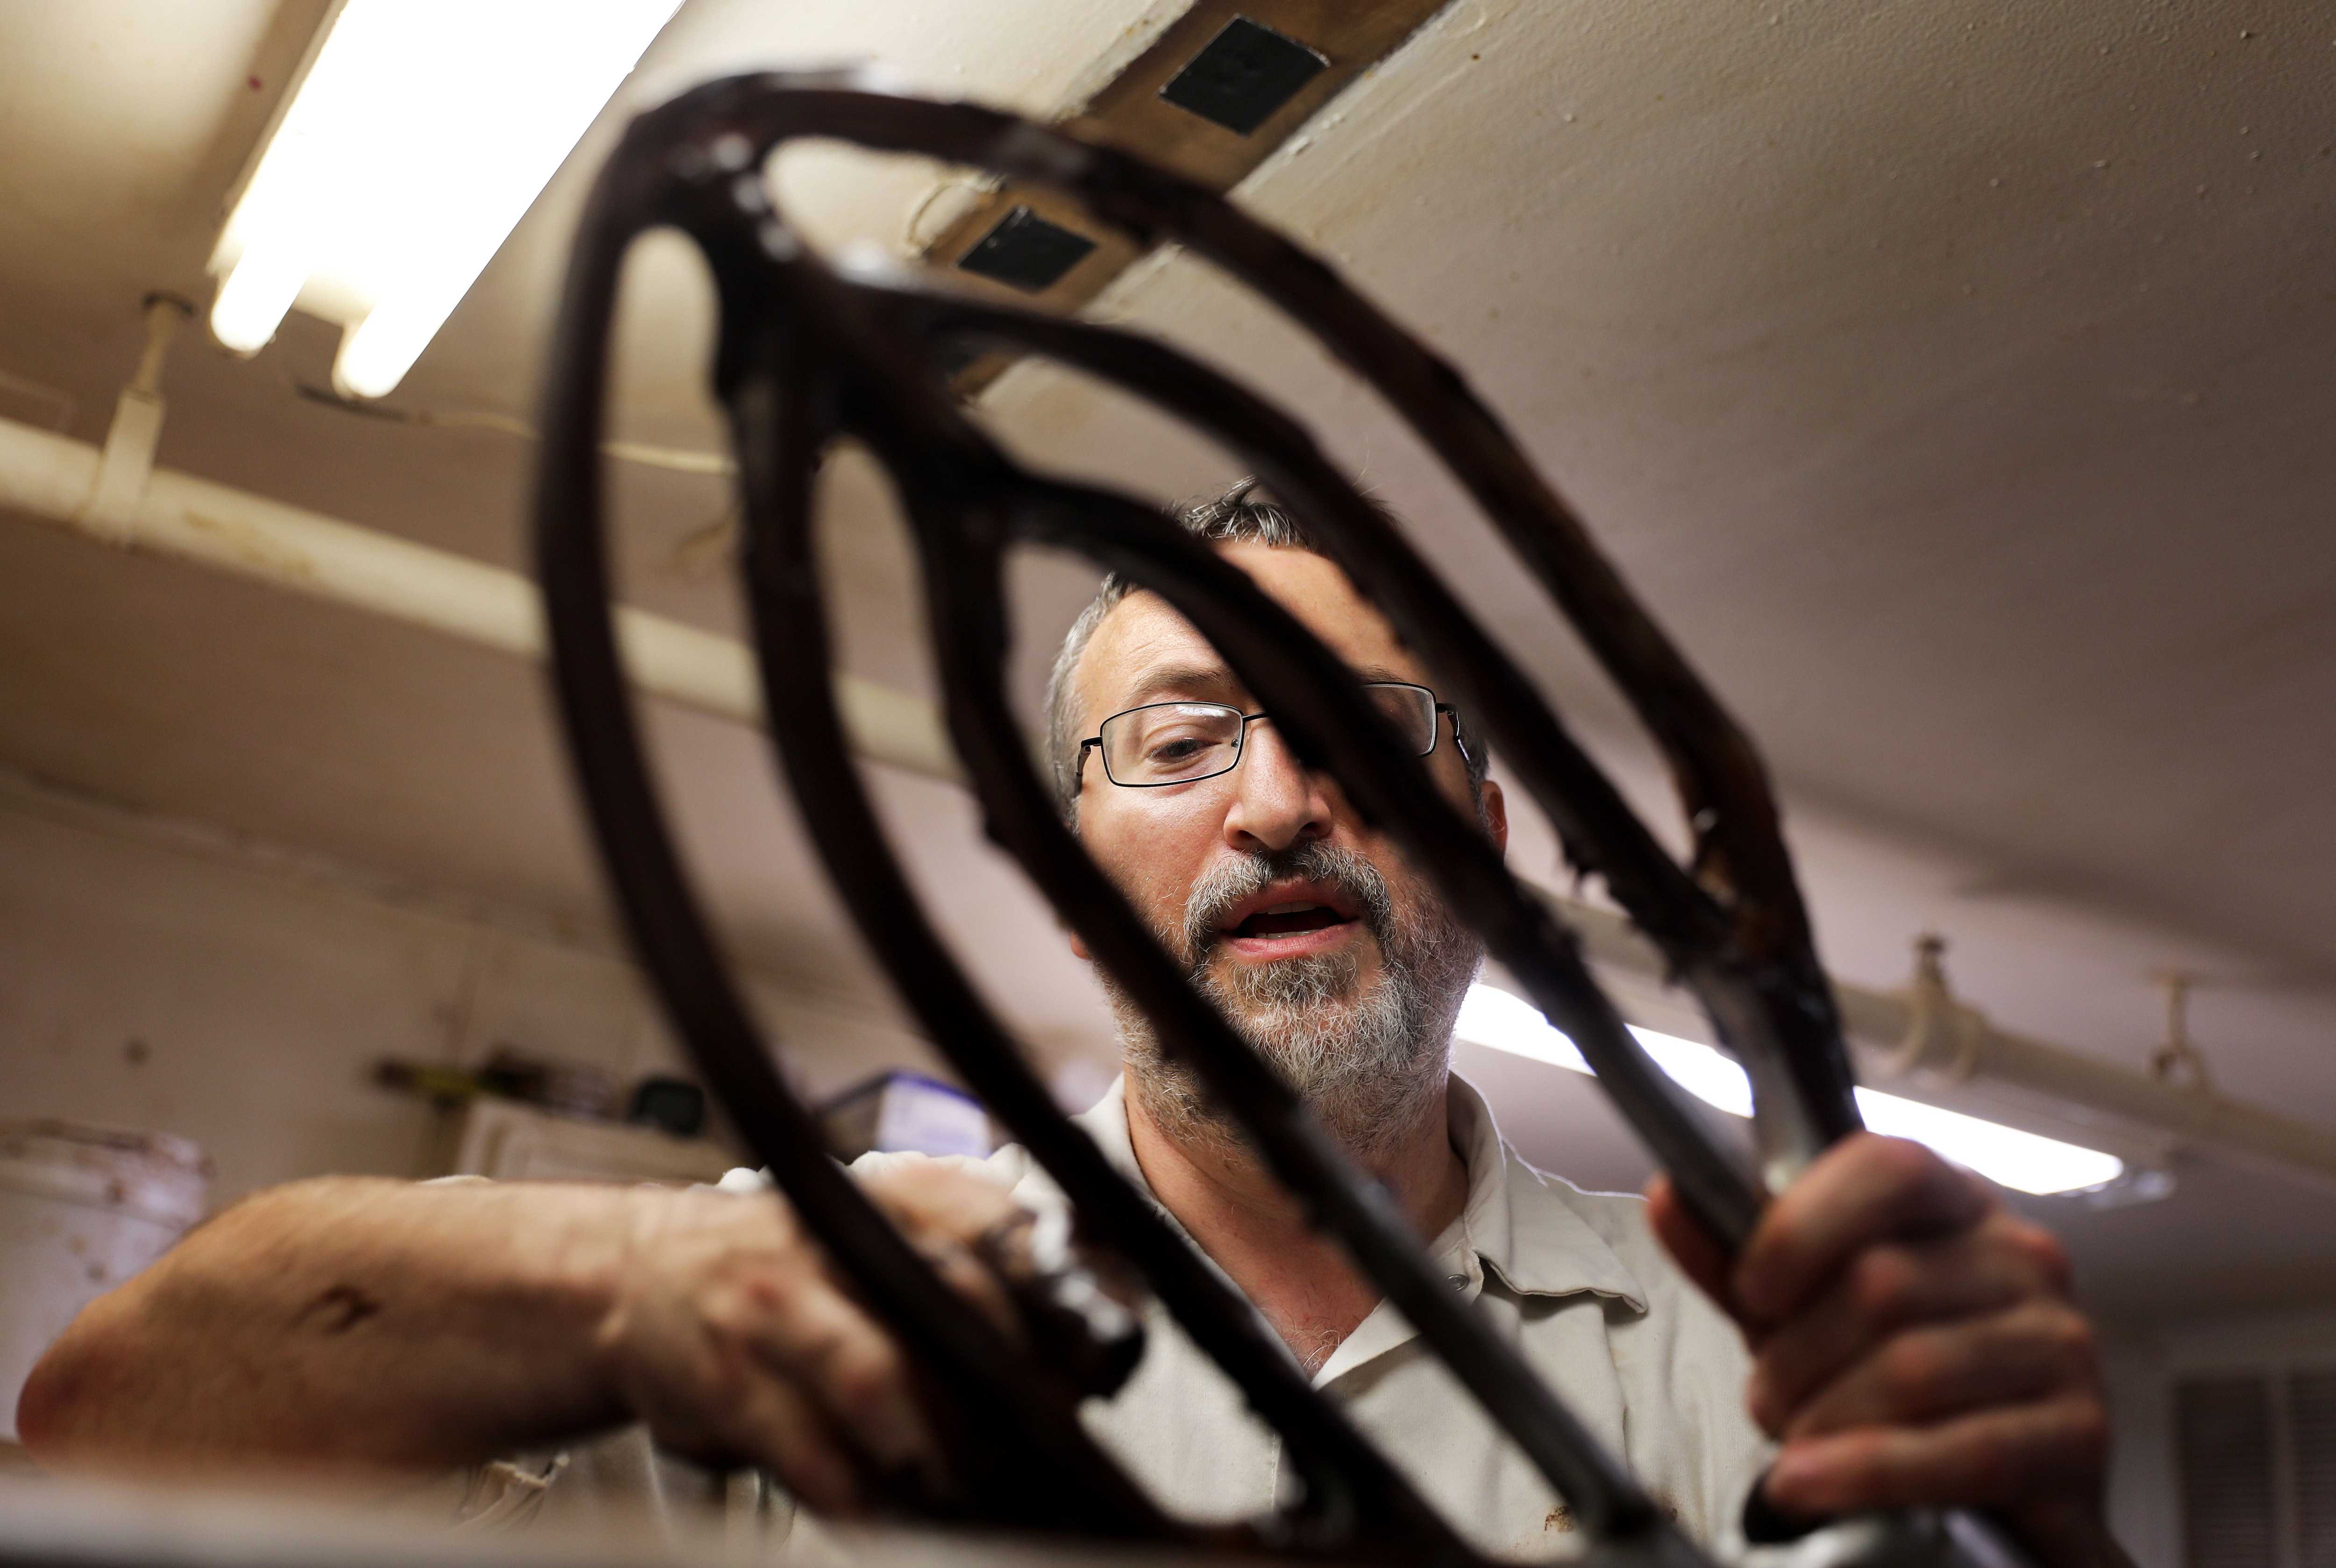 Israel Roling cleaned fudge from a paddle for an 80-quart bowl at his family’s strictly kosher business, Roling’s Bakery in Elkins Park, Pa.